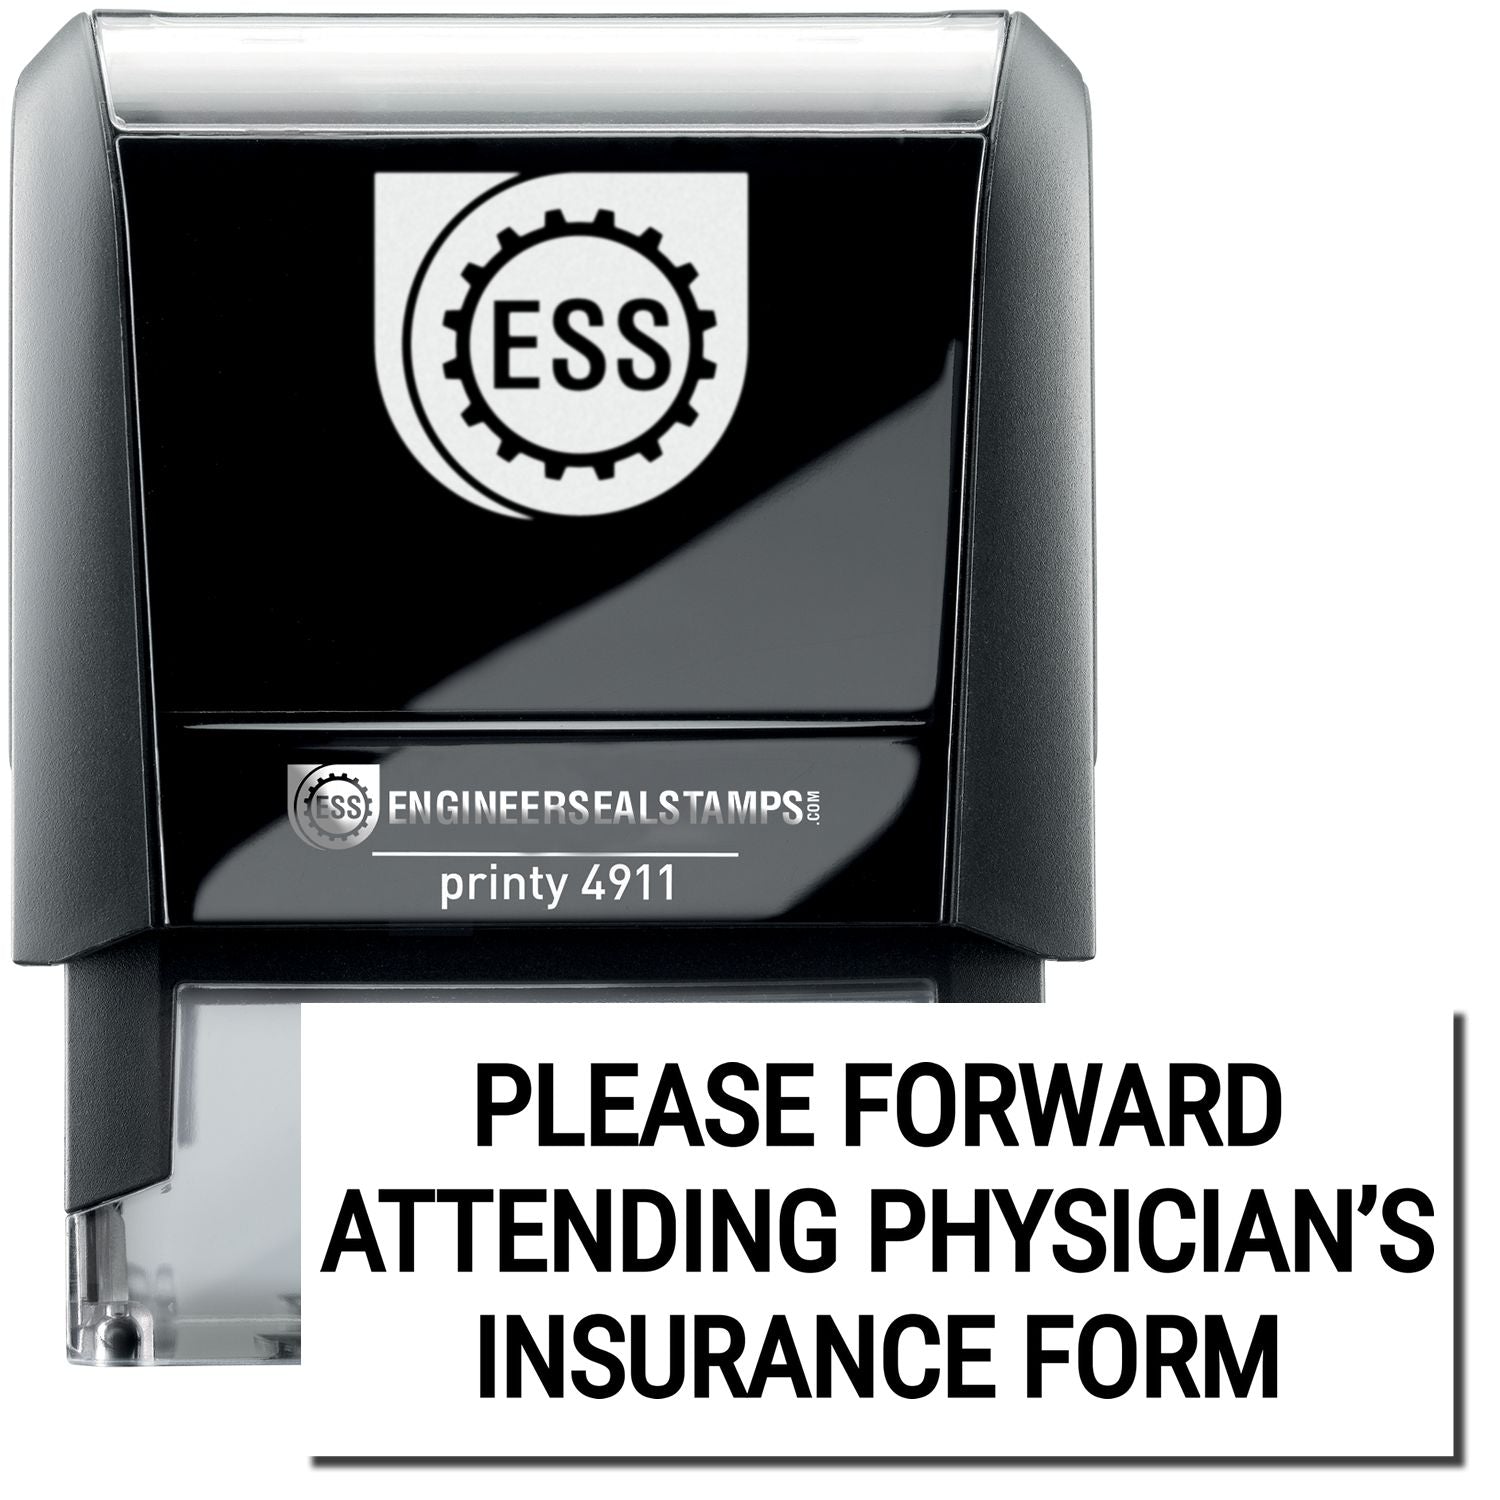 A self-inking stamp with a stamped image showing how the text "PLEASE FORWARD ATTENDING PHYSICIAN'S INSURANCE FORM" is displayed after stamping.